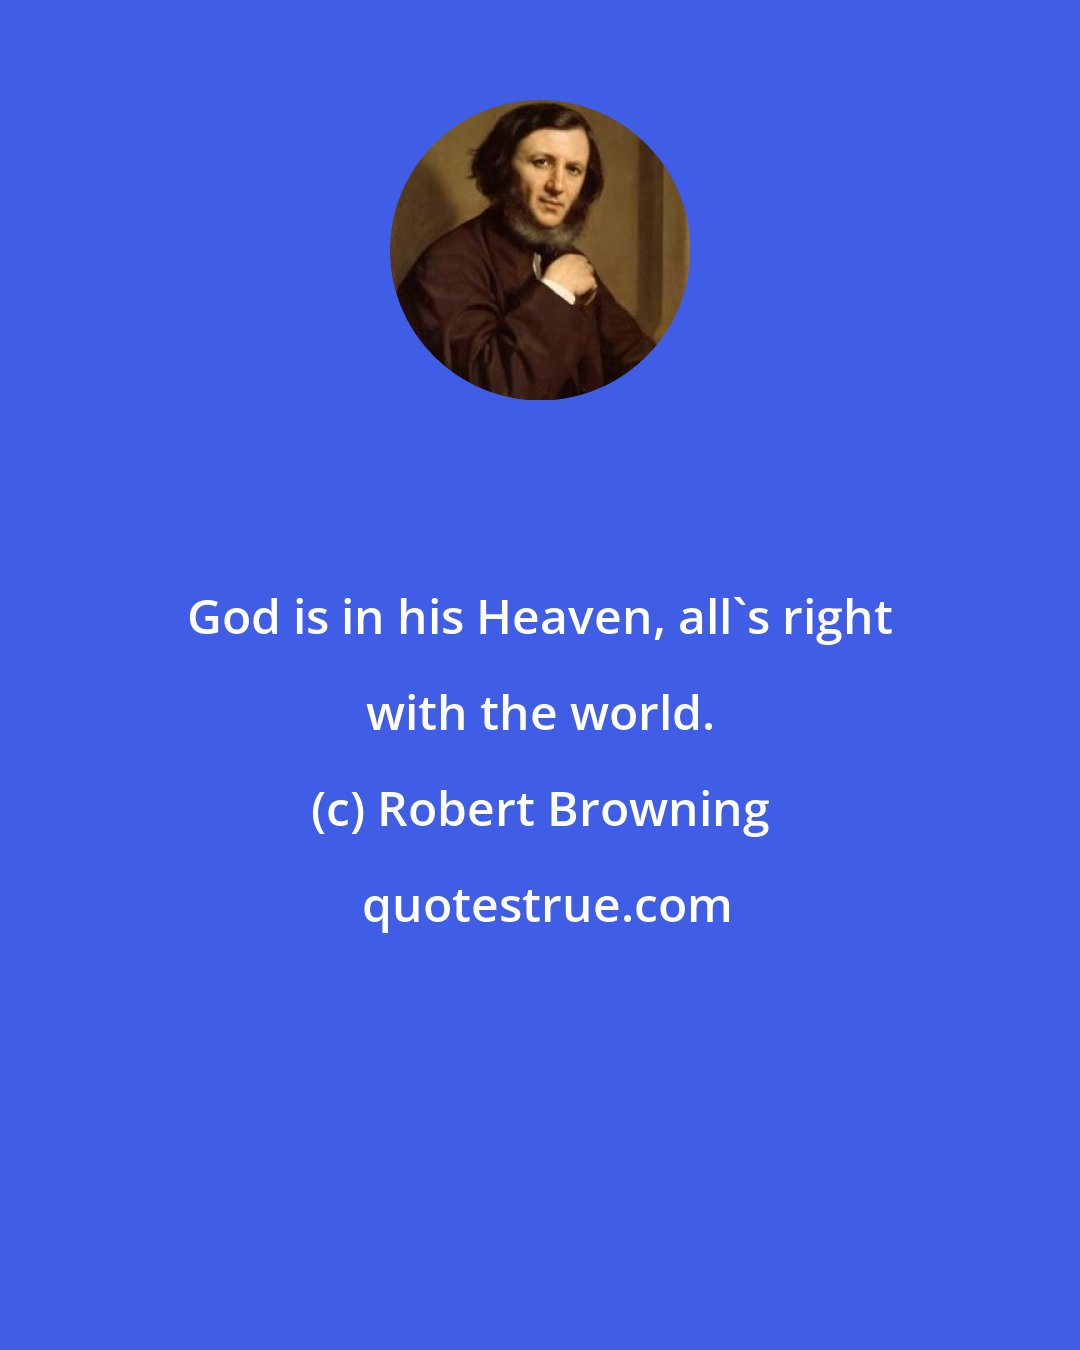 Robert Browning: God is in his Heaven, all's right with the world.